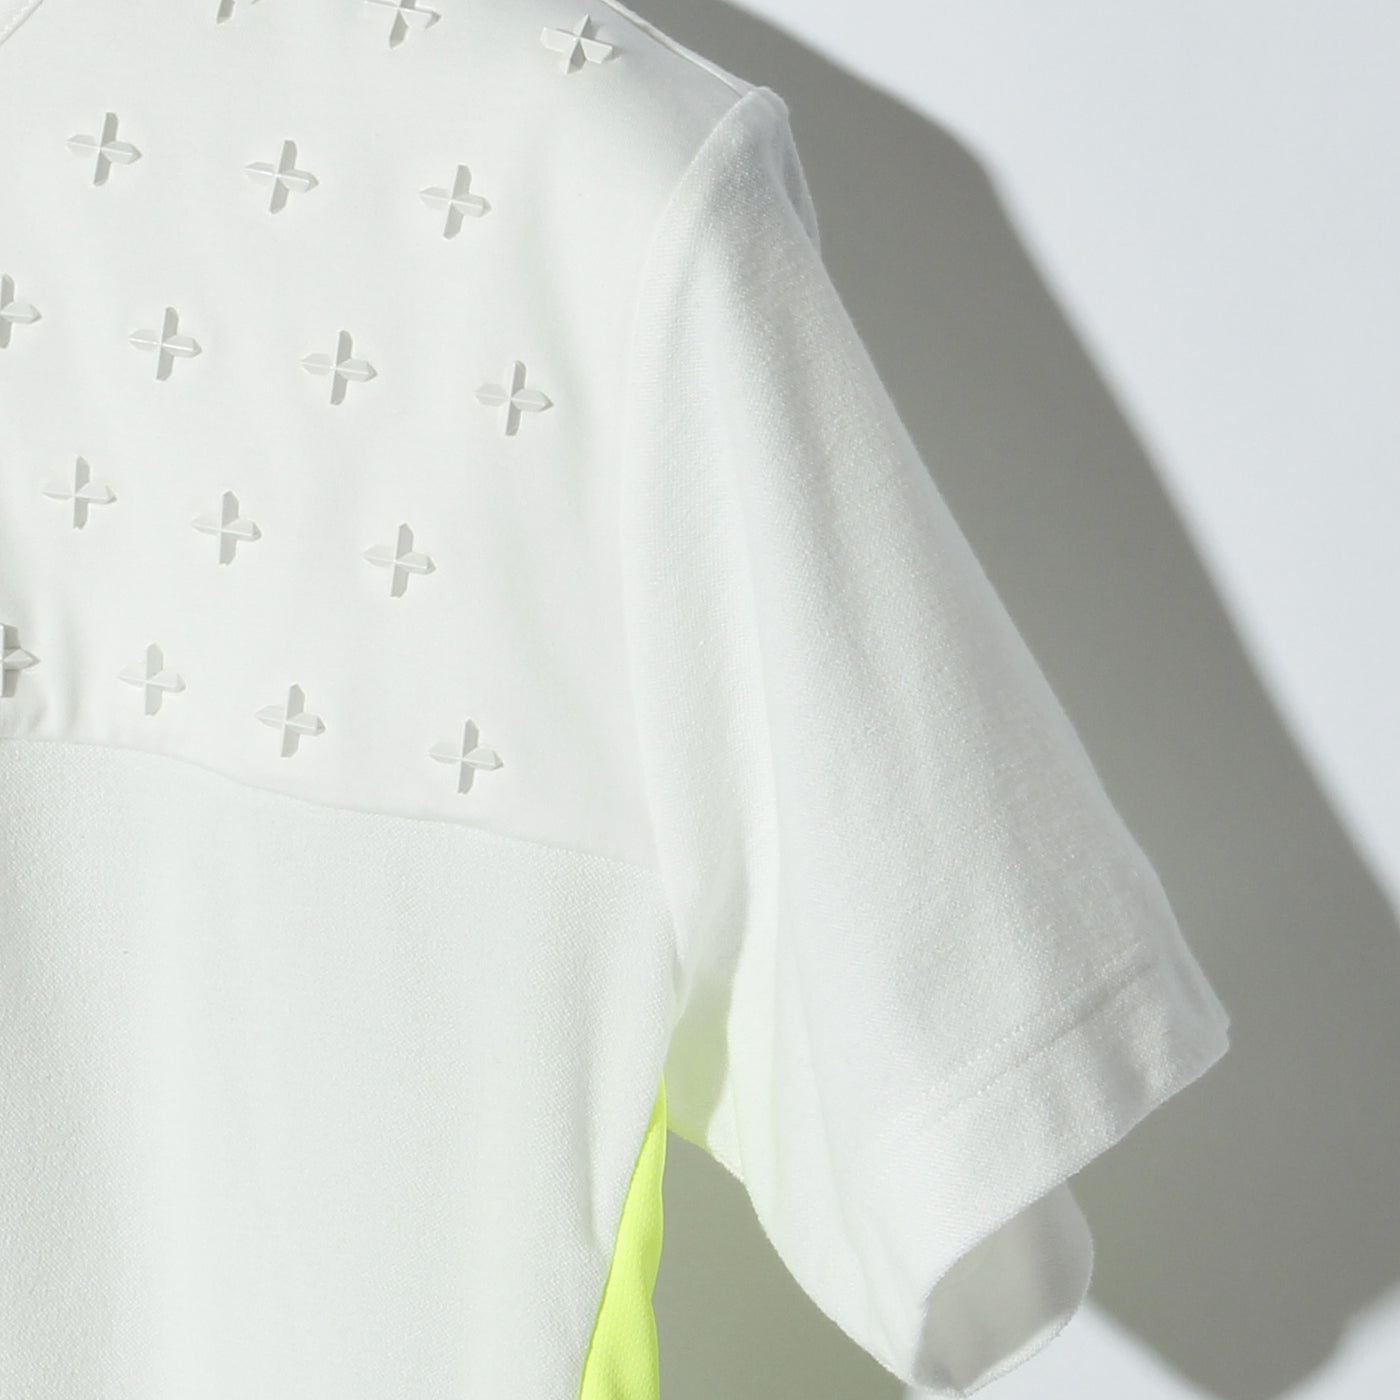 COMPACT PILE SIDE LINE CROSS STUDDED SHORT SLEEVE / C:OFF WHITE×NEON YELLOW